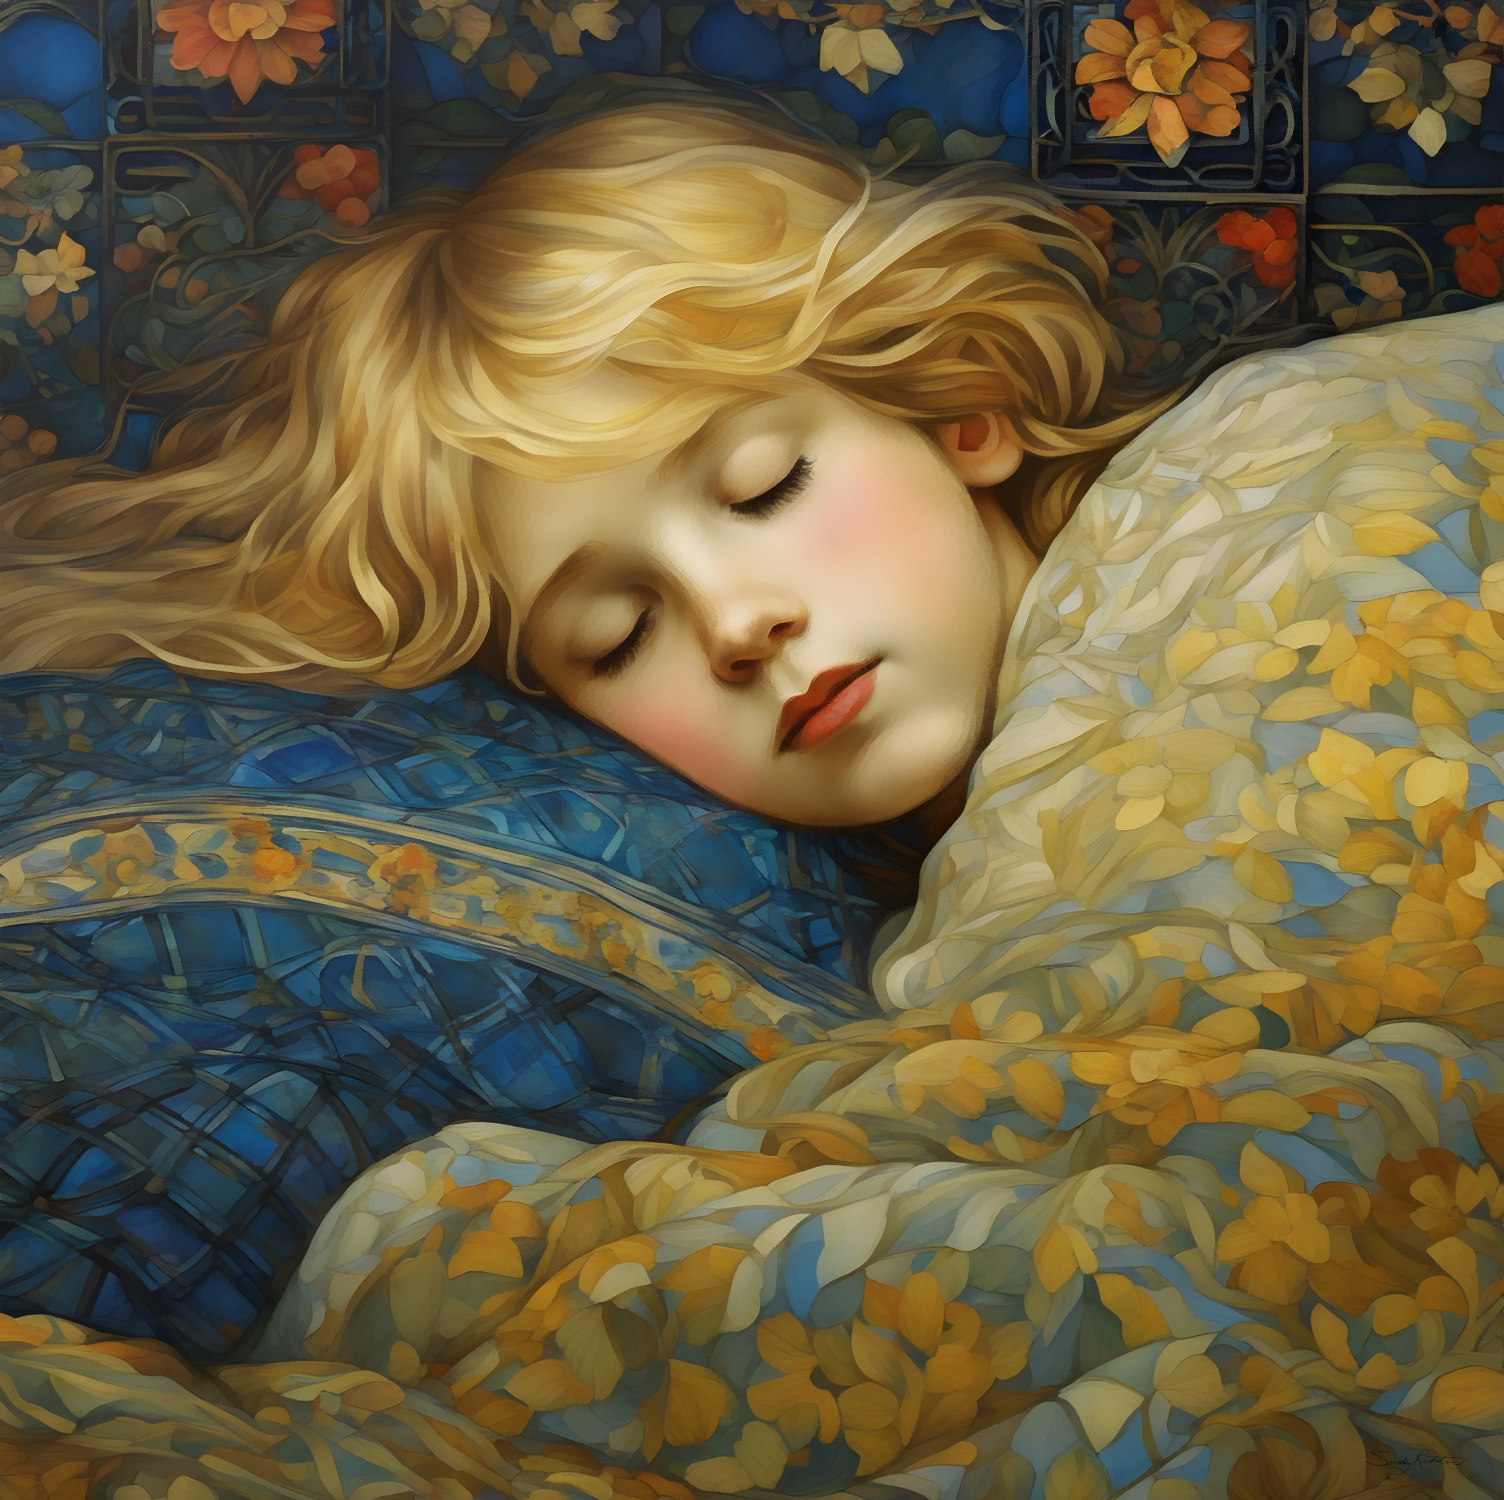 Beautiful Peaceful Sleeping Dreaming Child Painting Sweet dreams are made of these peaceful moments 💭🎨